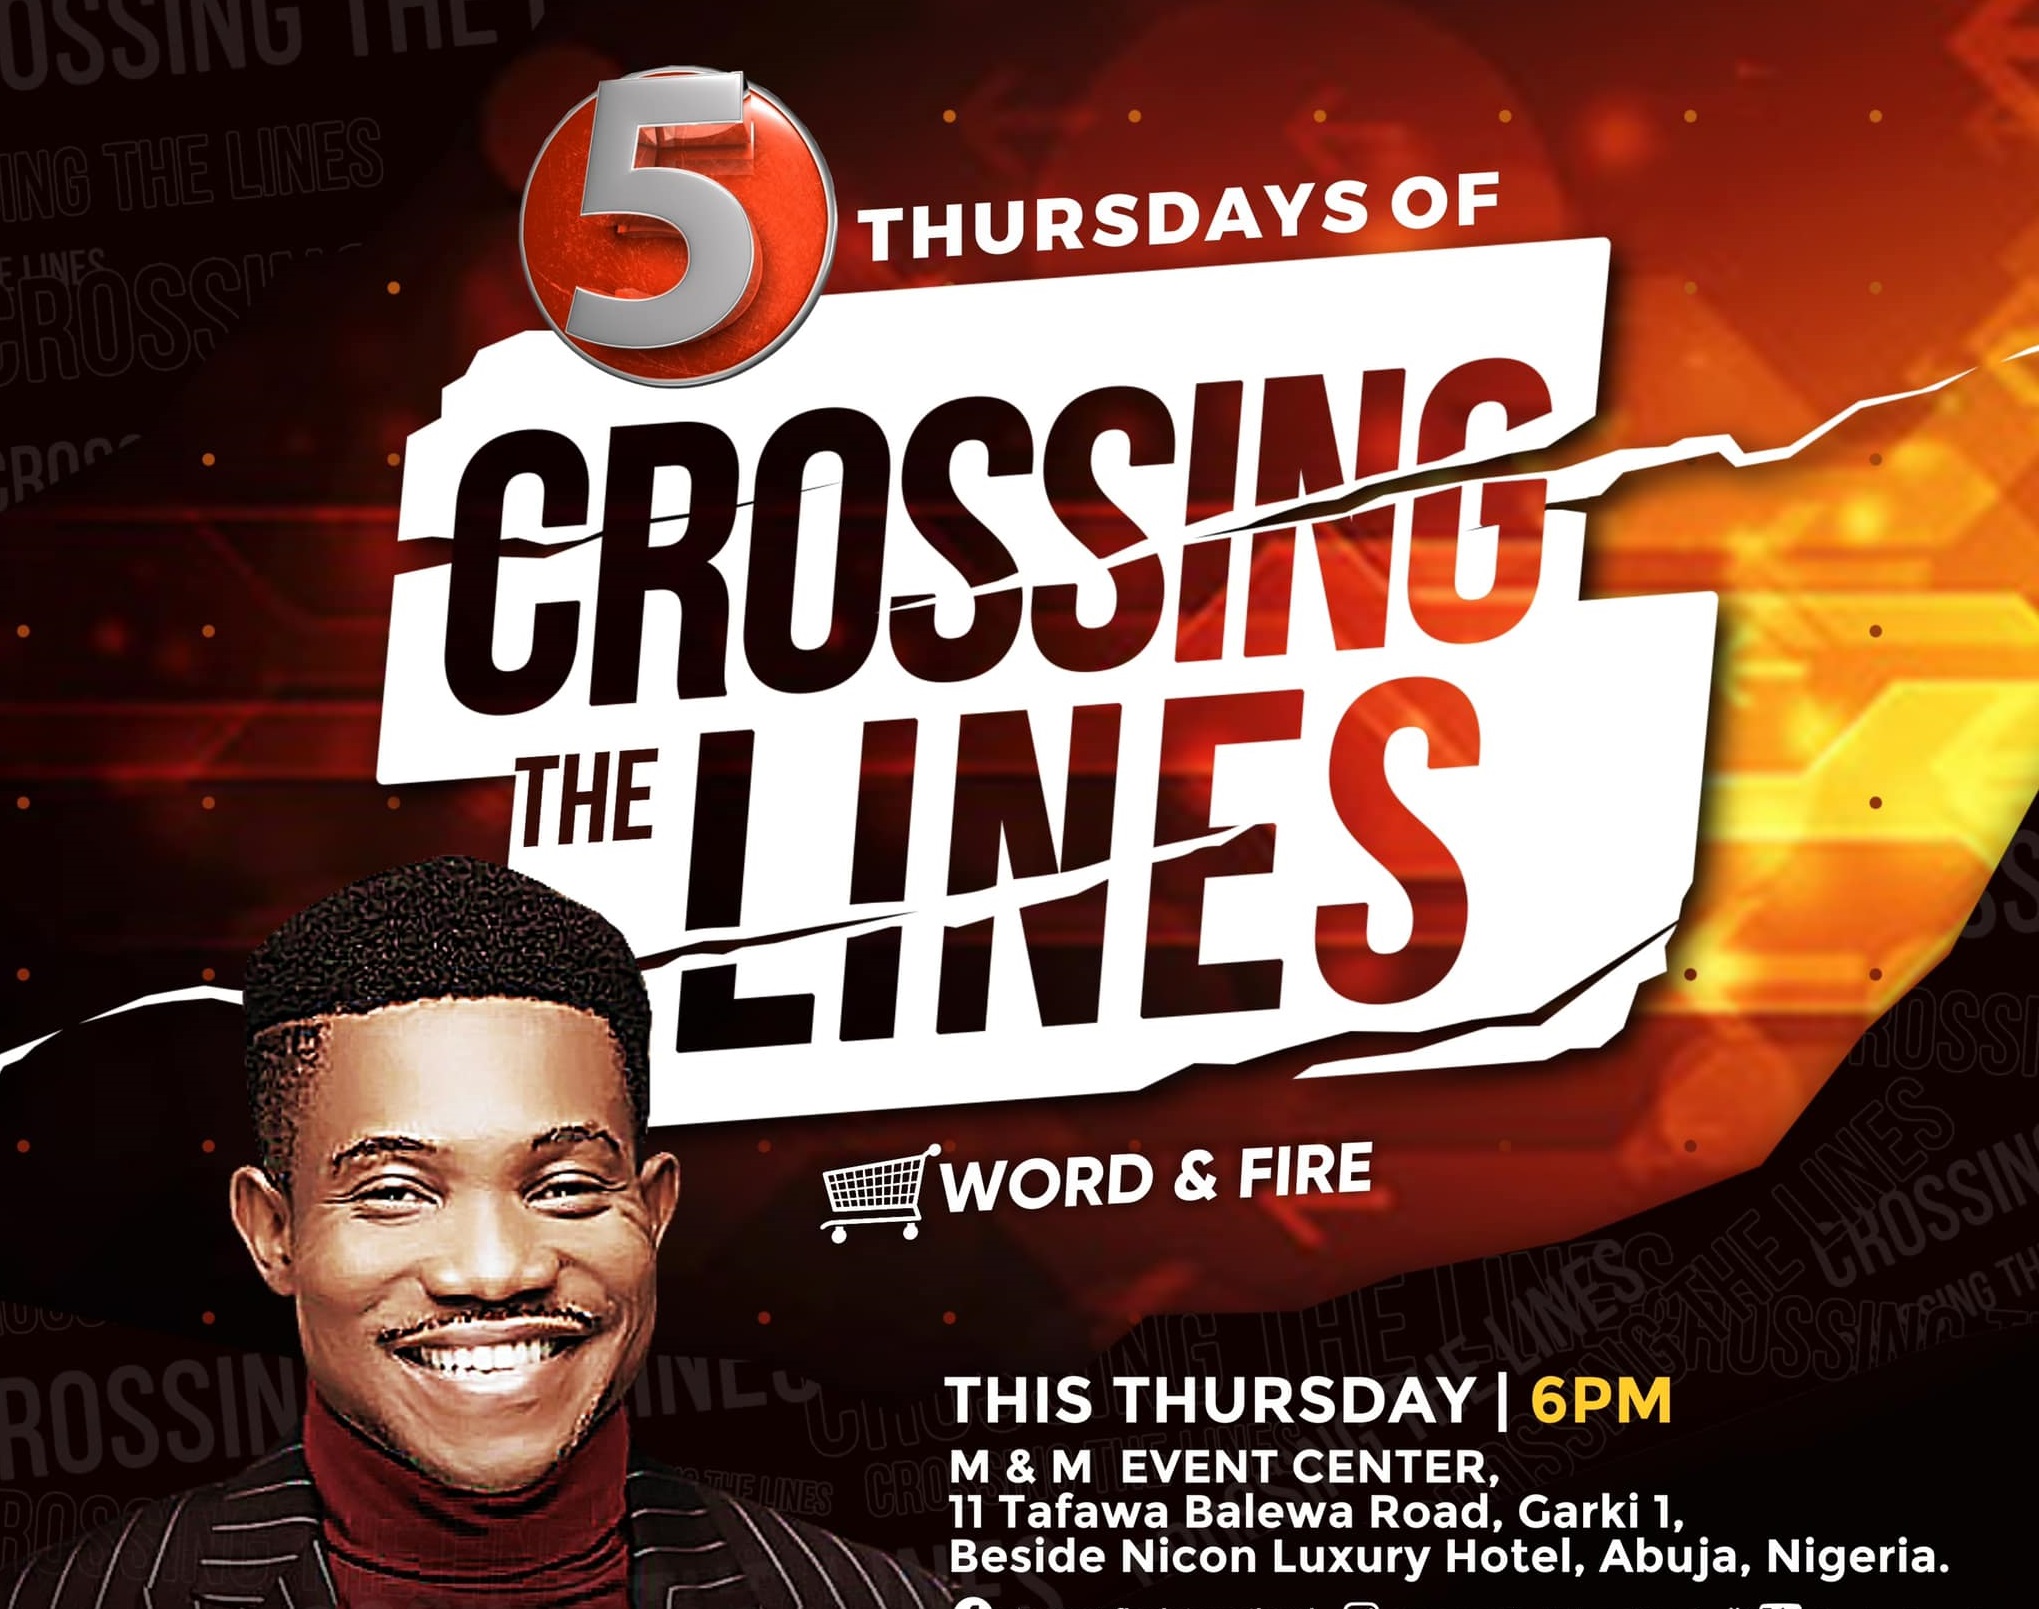 Streams of Joy Live Service 15 September 2022 For Midweek 5 Thursday of Crossing the Lines